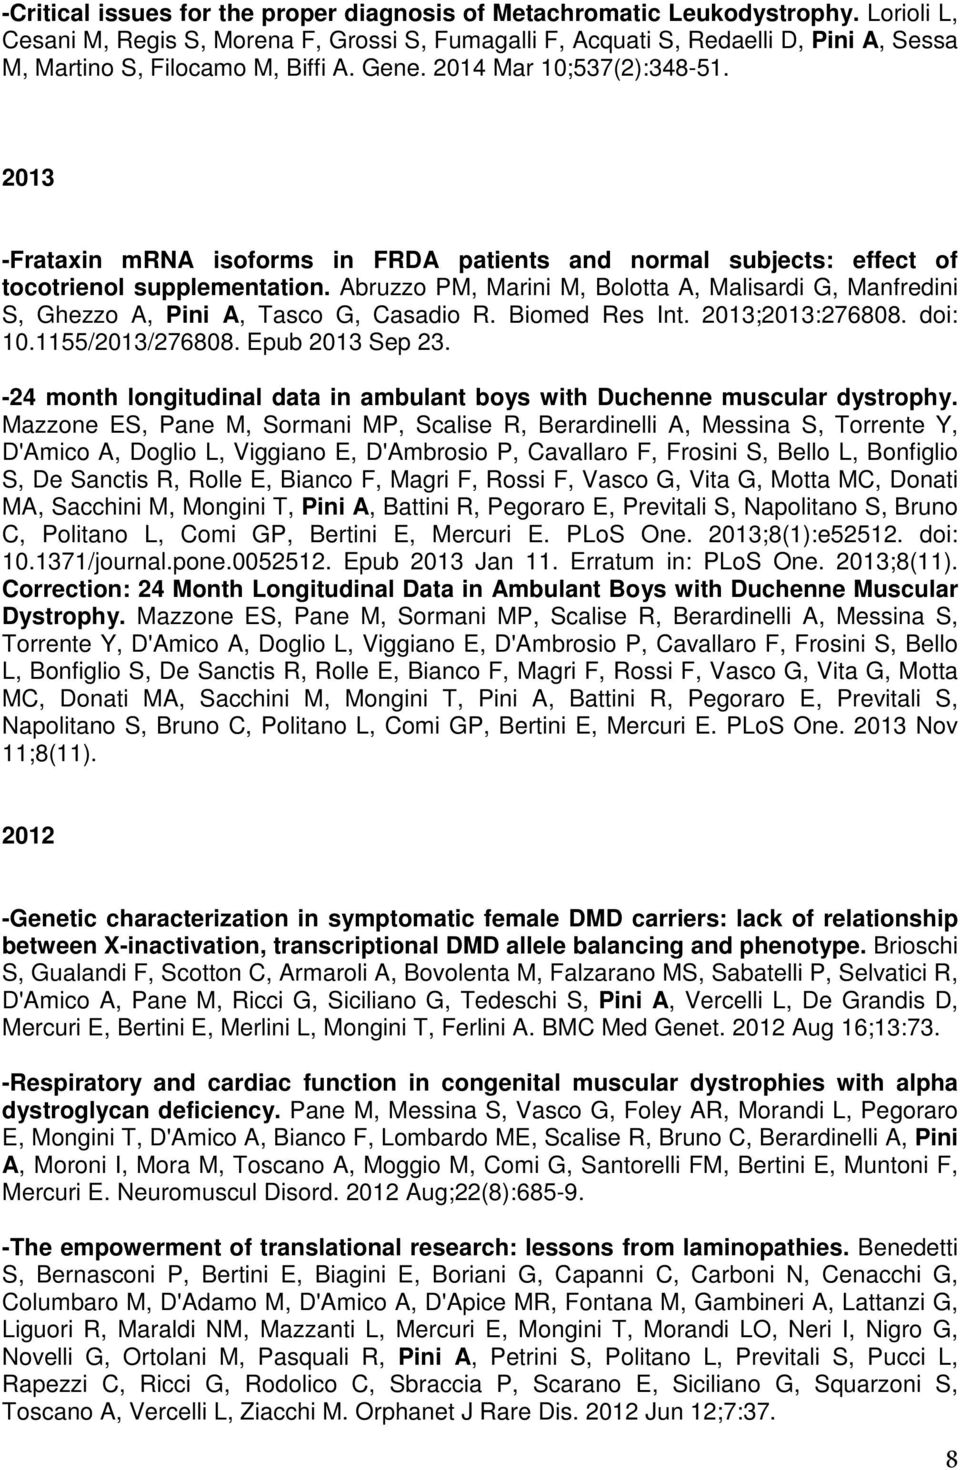 2013 -Frataxin mrna isoforms in FRDA patients and normal subjects: effect of tocotrienol supplementation.